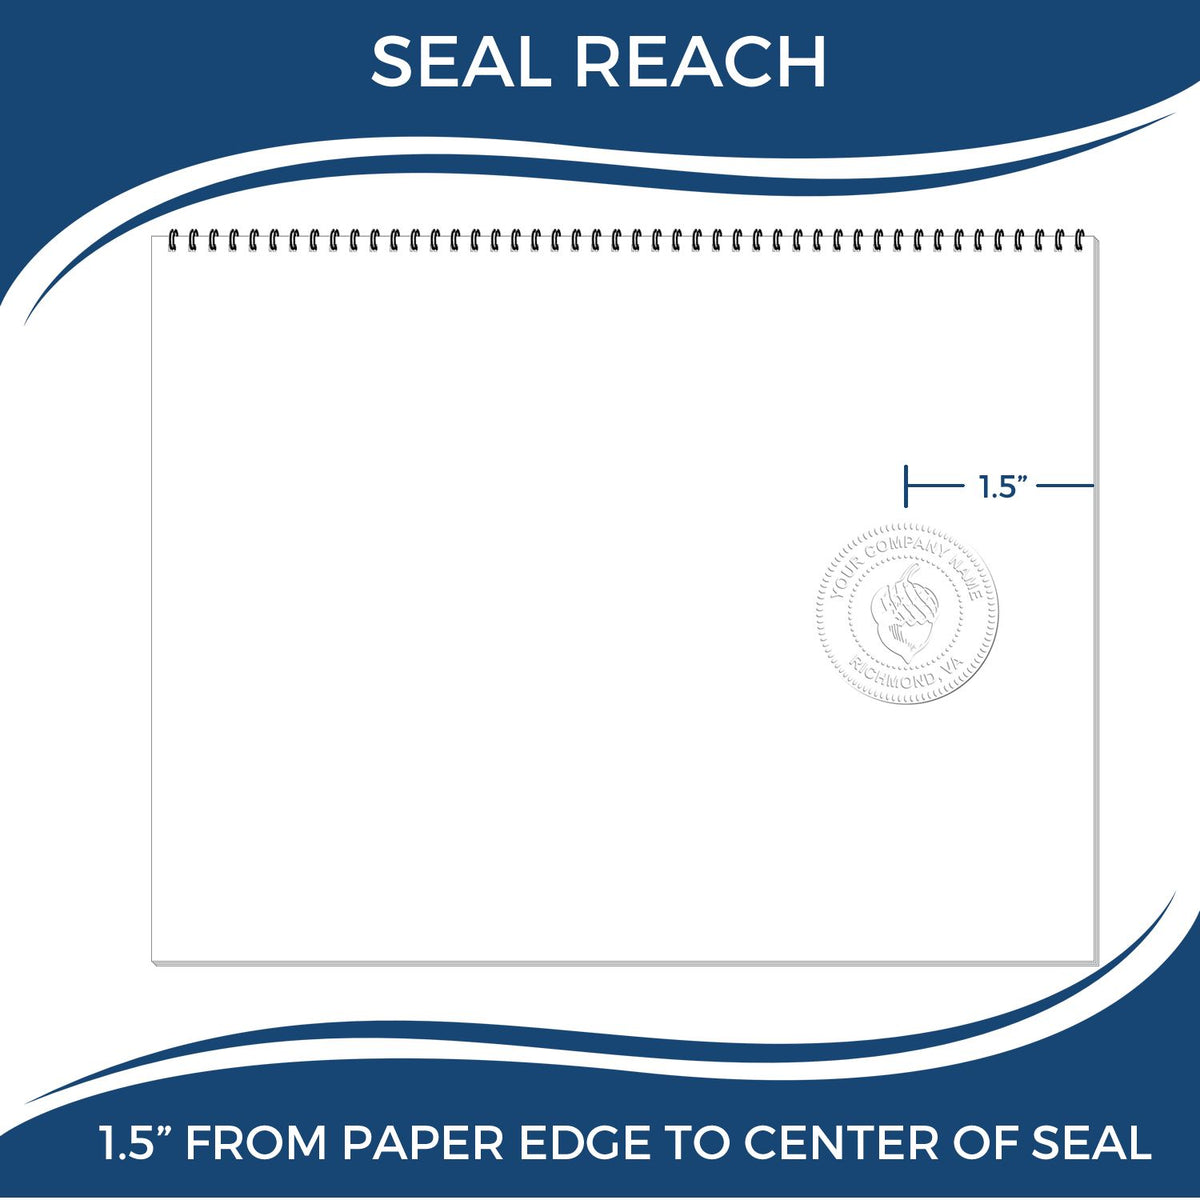 An infographic showing the seal reach which is represented by a ruler and a miniature seal image of the Hybrid Tennessee Land Surveyor Seal